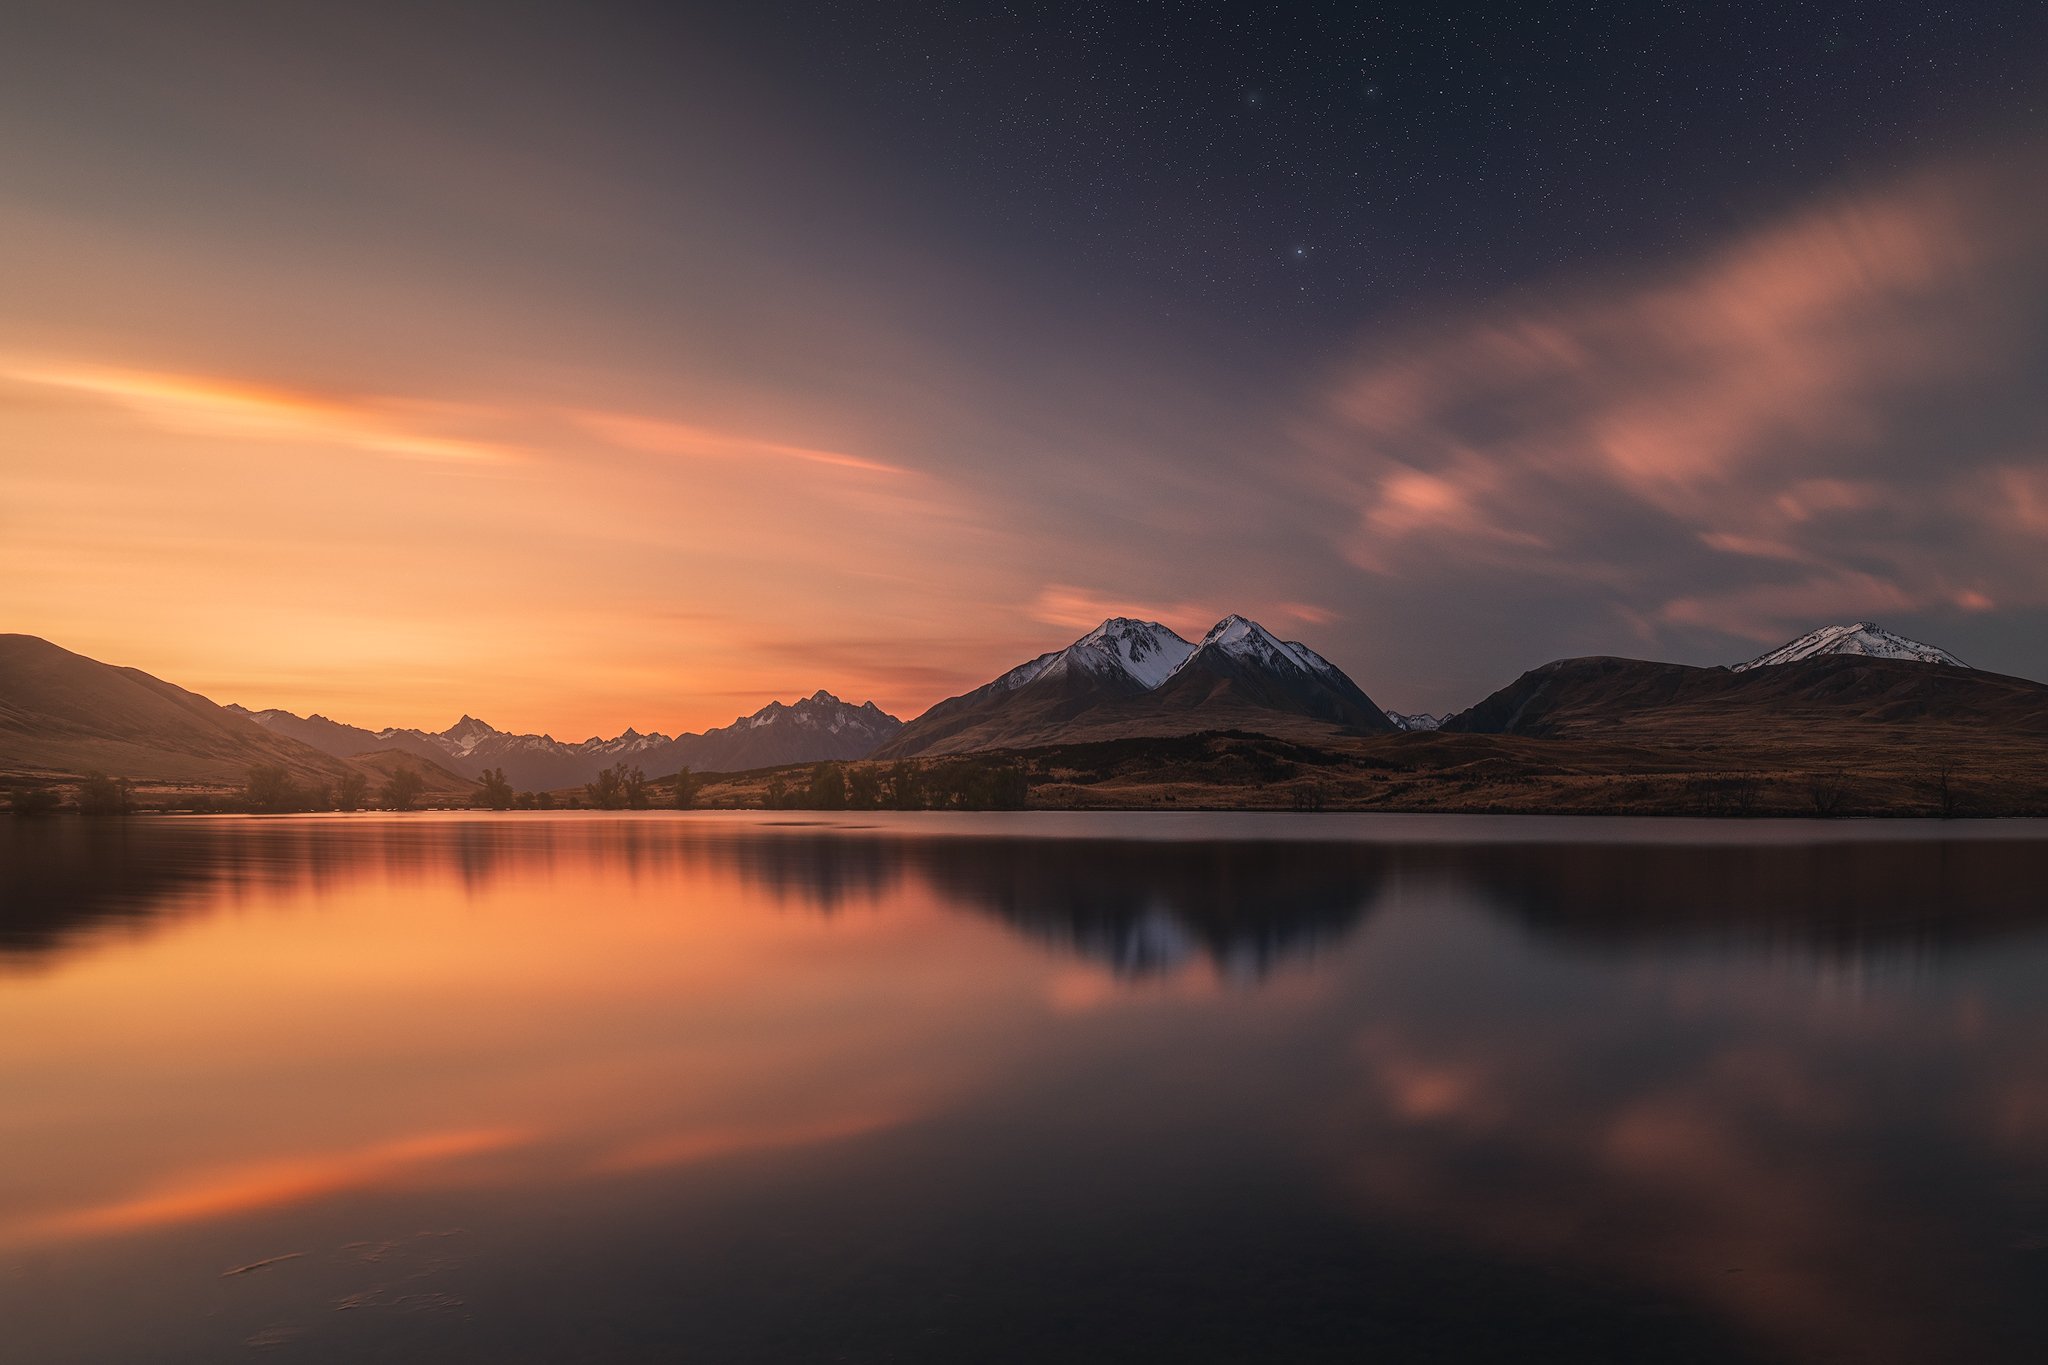 General 2048x1365 nature mountains sky clouds lake reflection snow sunset trees landscape stars low light